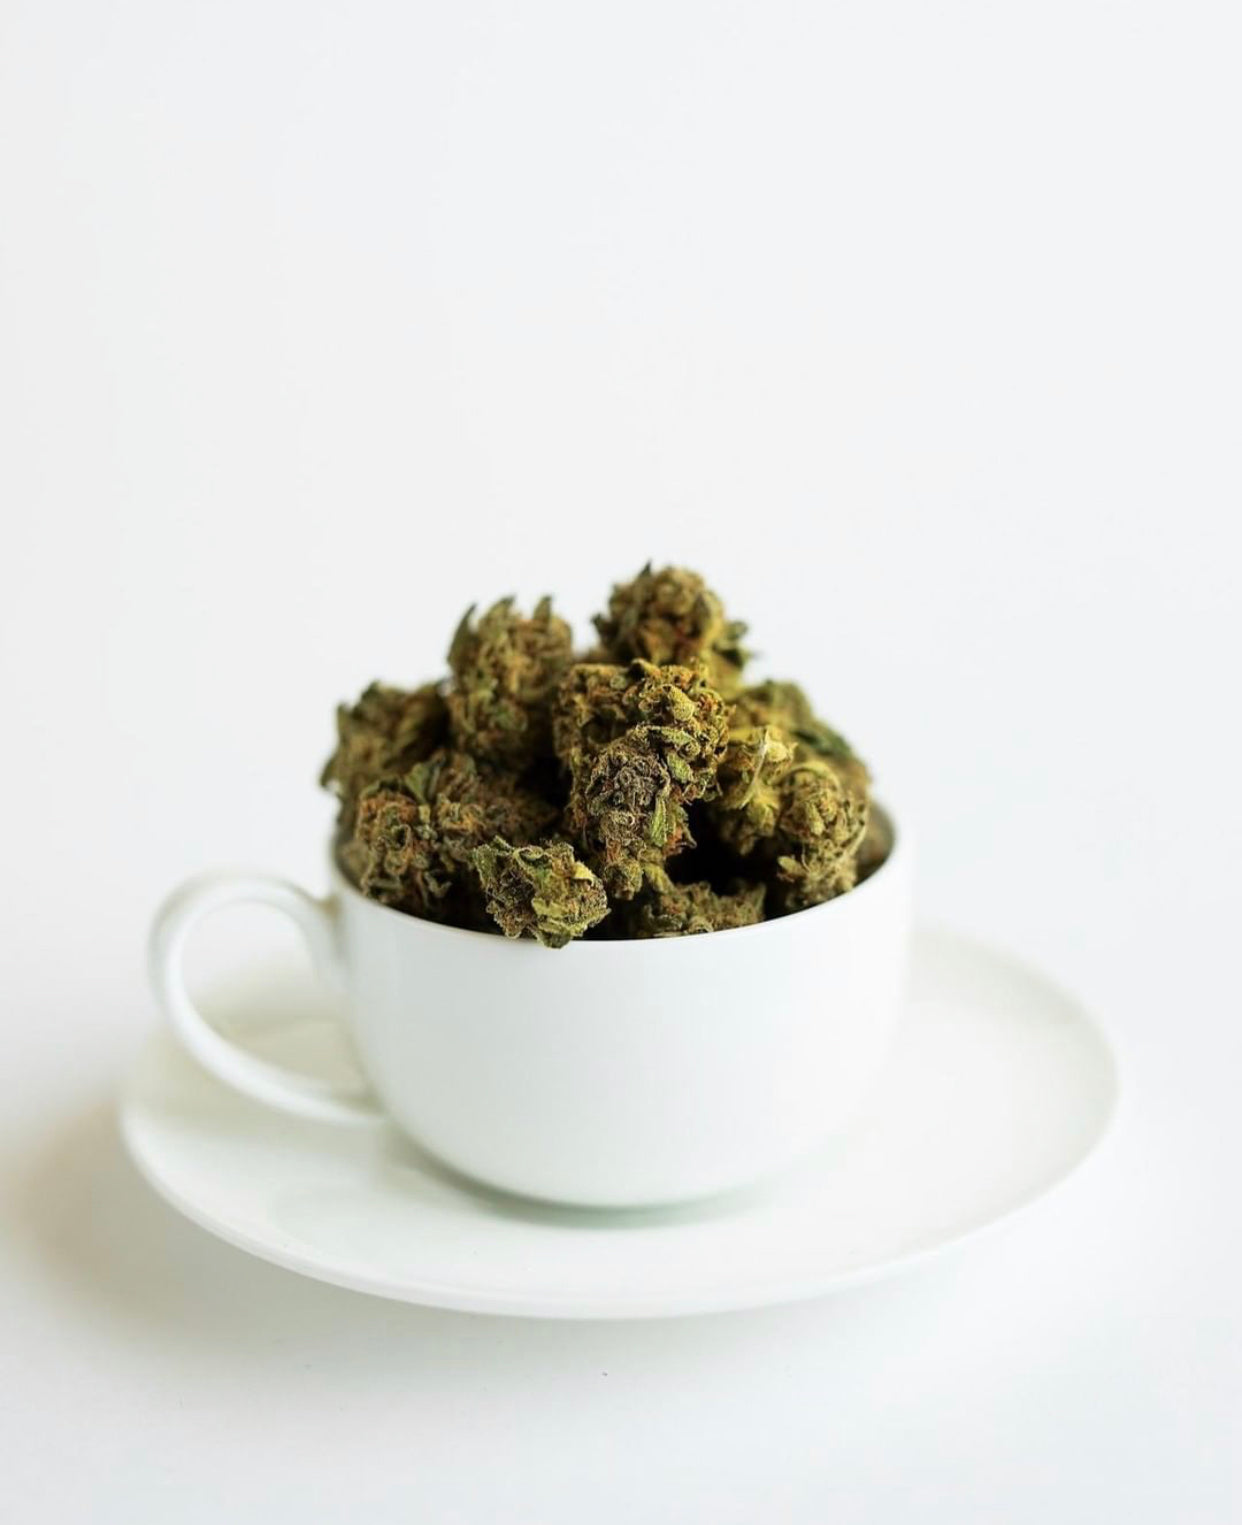 Is Cannabis Your Cup of Tea?